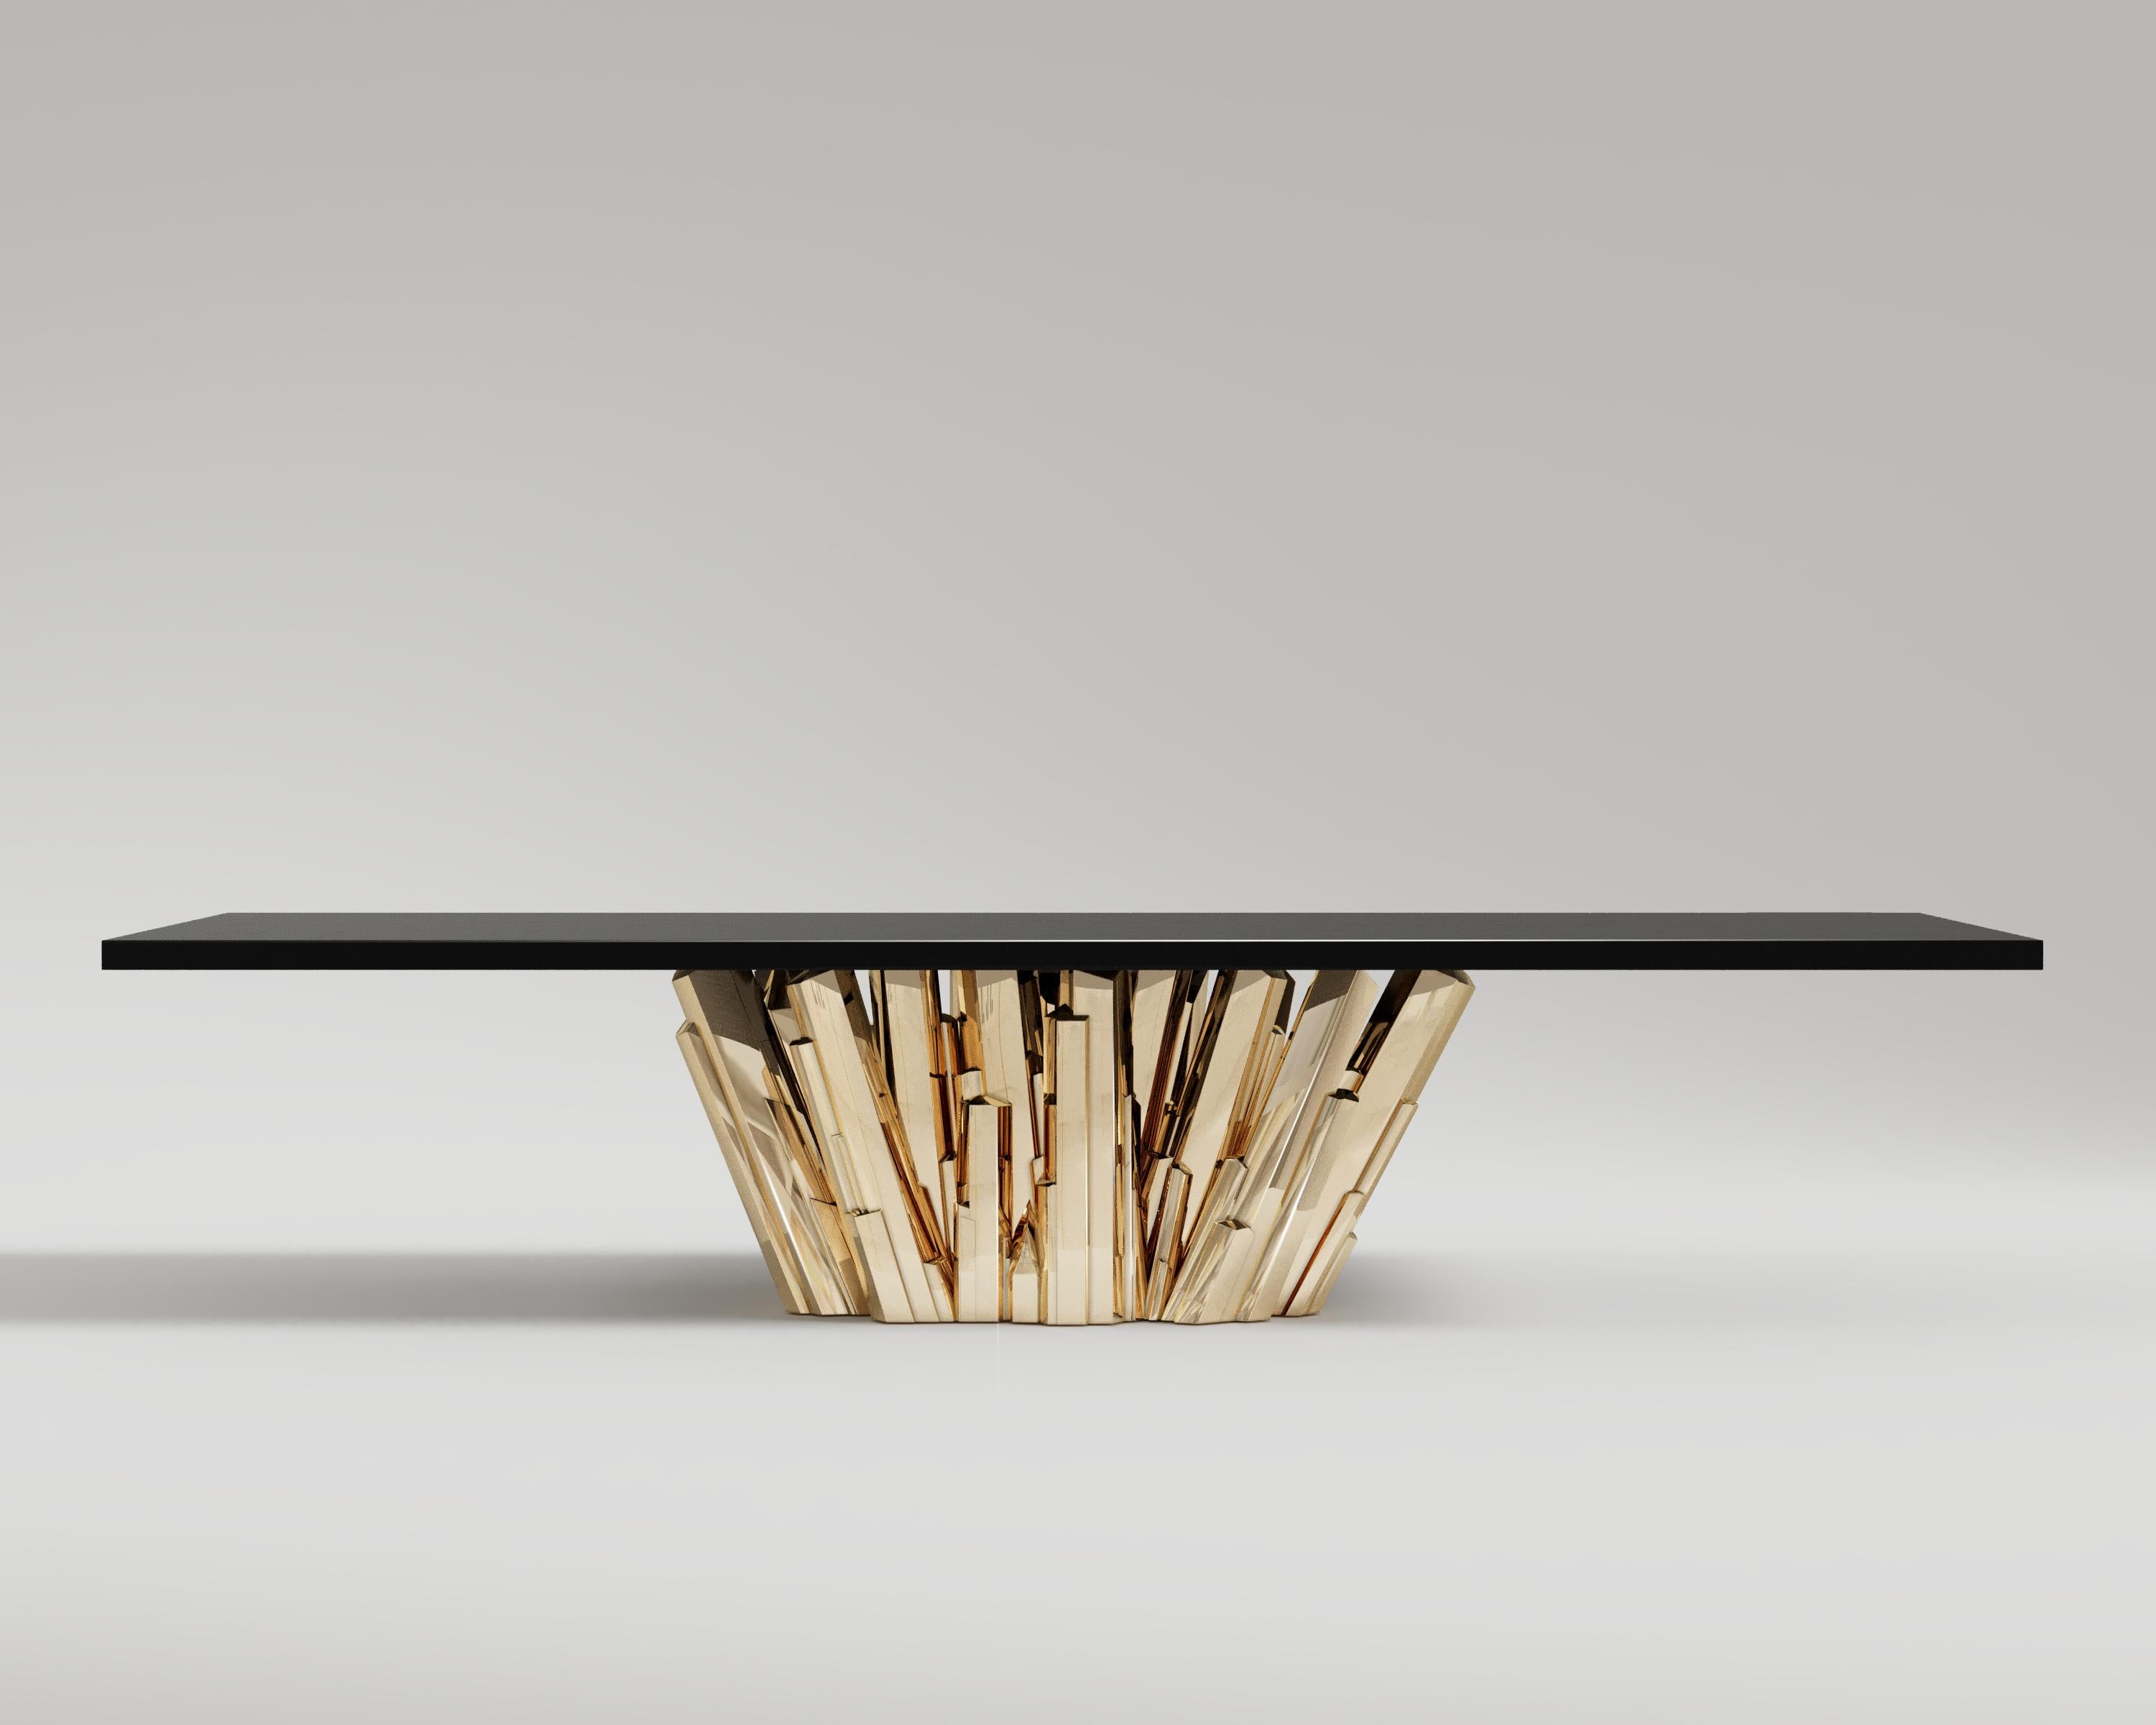 Meta Crystal Dining Table
Revealing its luxuriant character, the Meta Crystal invites you to delve into an atmosphere of pure sophistication. Pairing a natural slab with a contrasting bronze base, the Meta Crystal Dining Table brings grace and